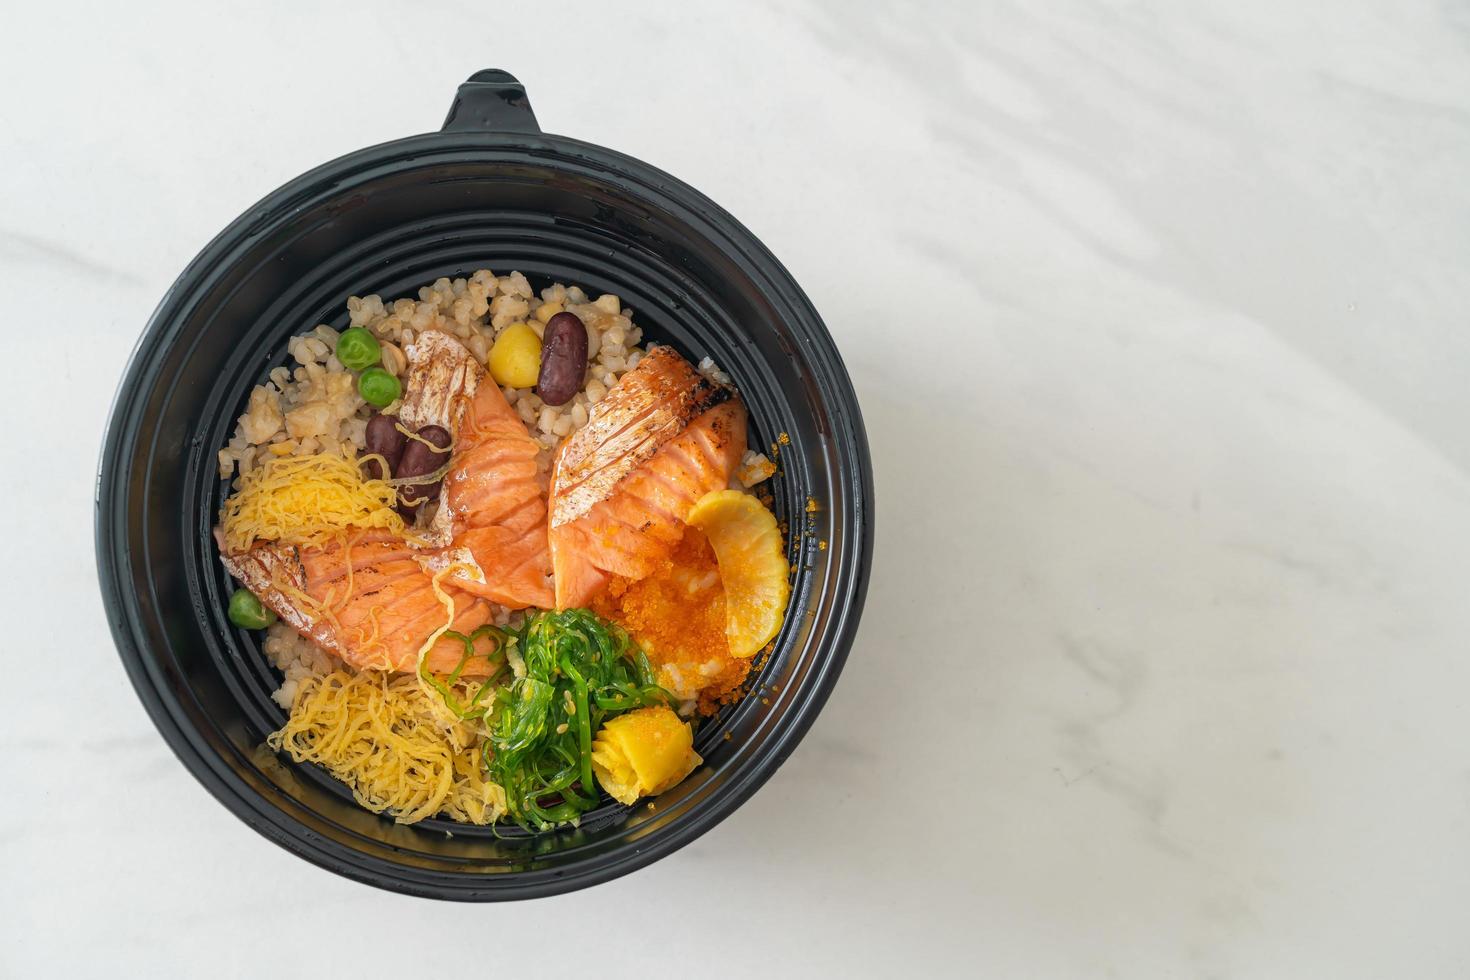 Grilled salmon with brown rice donburi photo